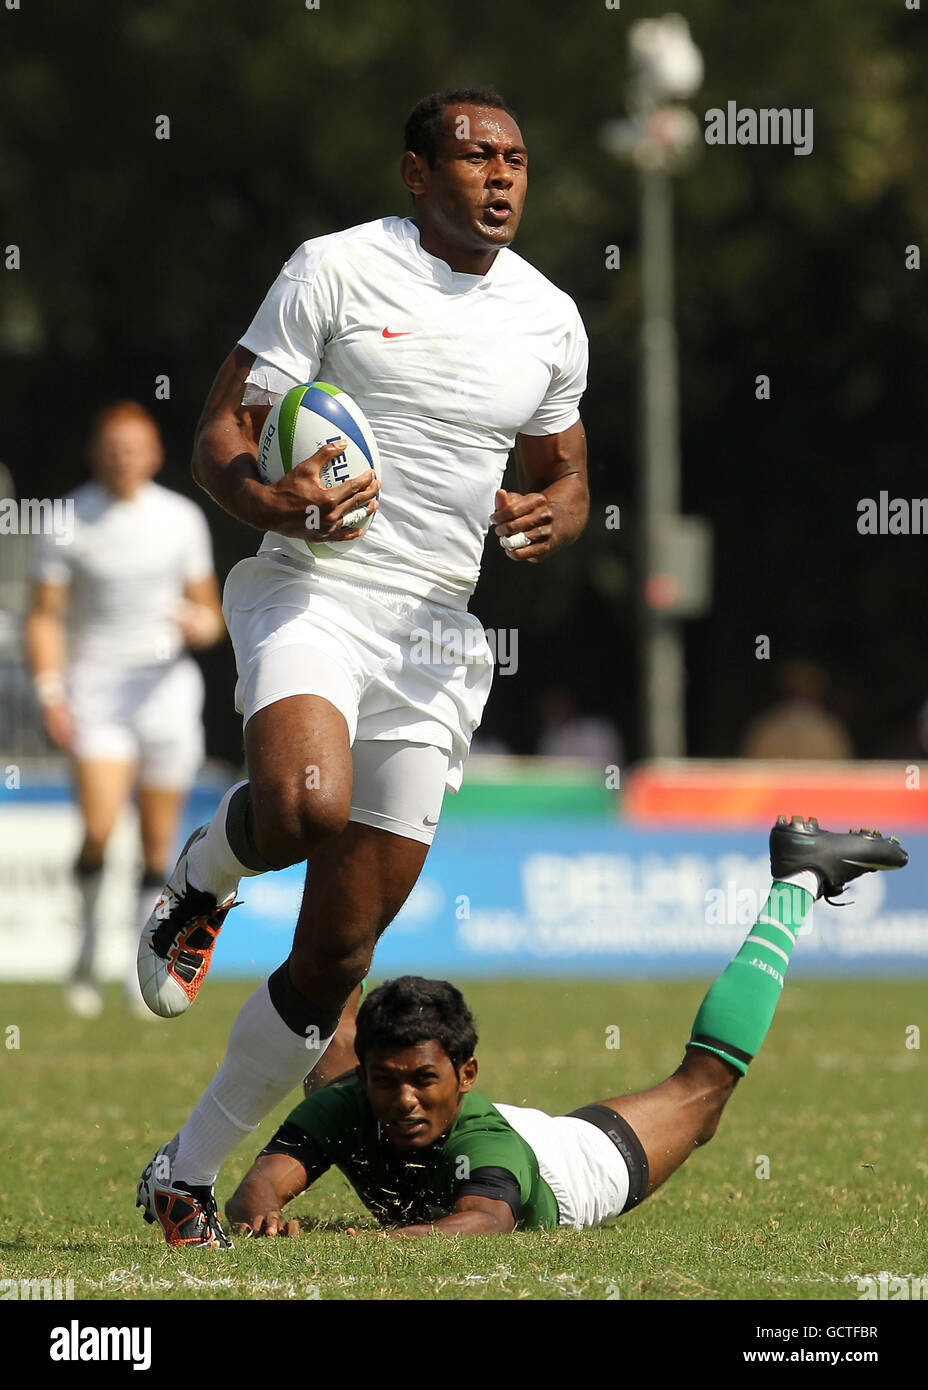 England's Iosa Damudamu runs to score a try against Sri Lanka in the Rugby 7's round of pool matches at the Delhi University Stadium in Delhi, India Stock Photo